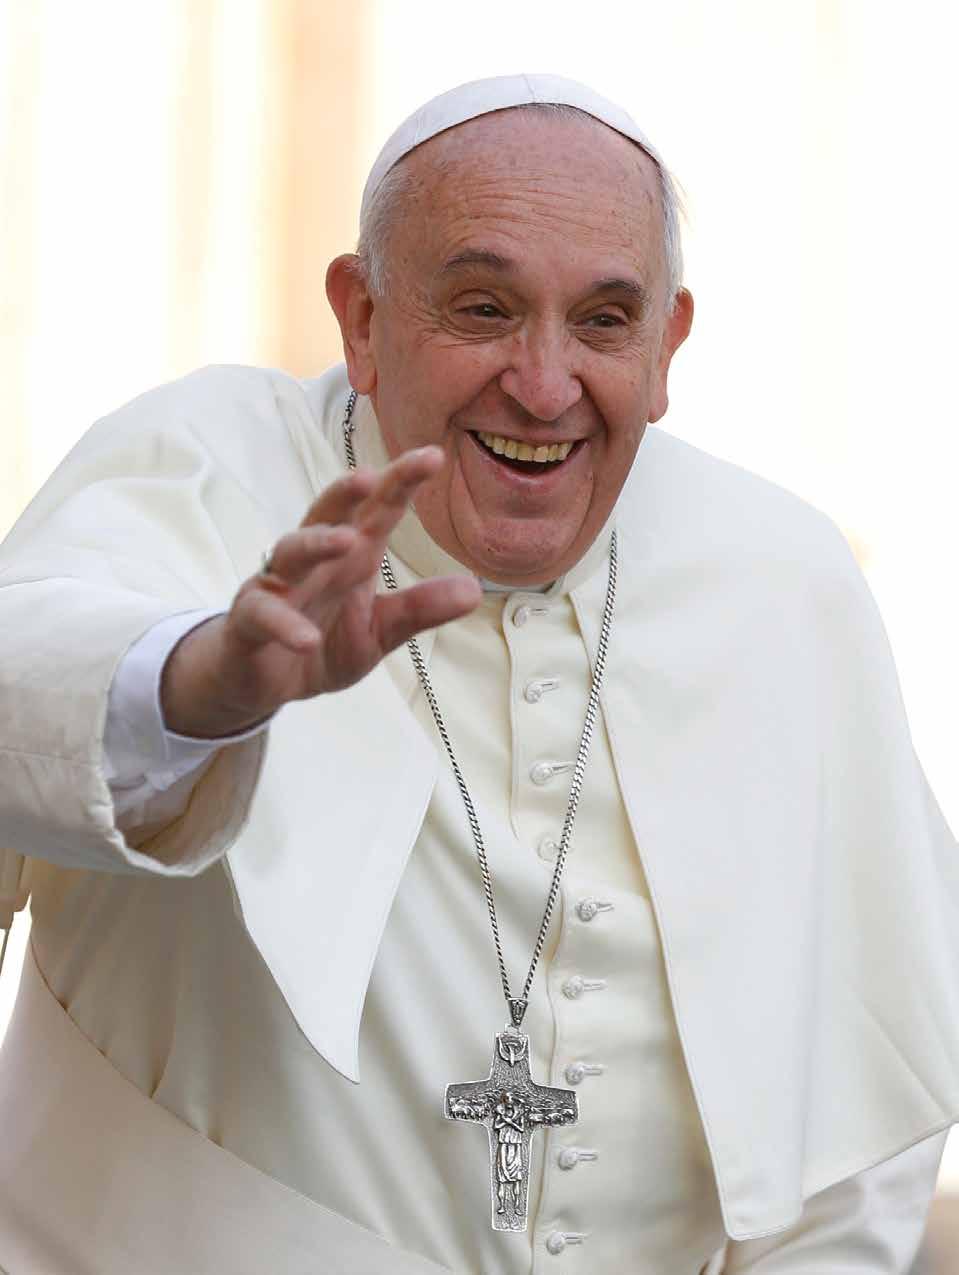 12 The Mirror October 31, 2014 ADULT FAITH Living joy with Pope Francis Trio of lessons from The Gospel of Joy By Jennifer Manning Pope Francis is a master teacher for today s world.